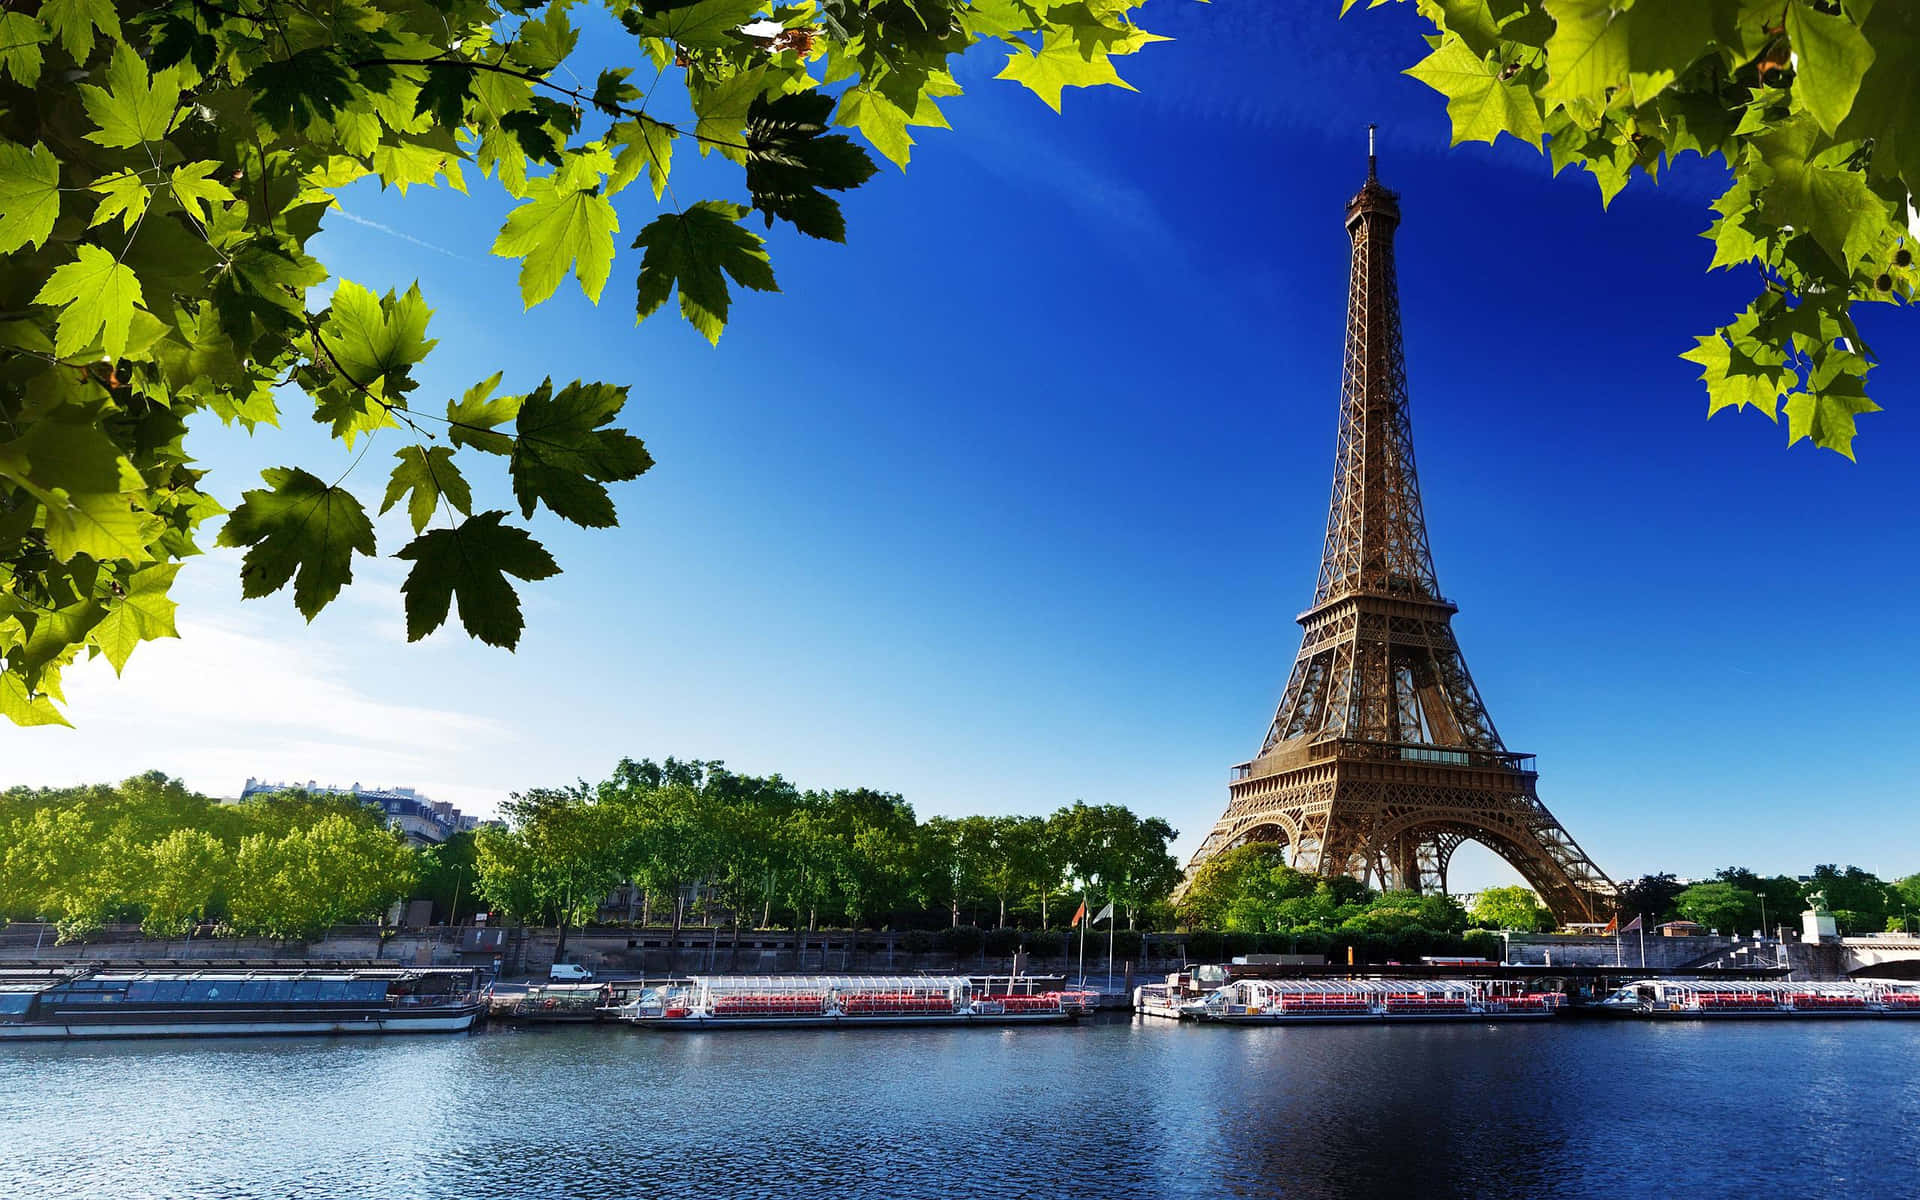 An iconic view of Eiffel Tower from Trocadero Square.